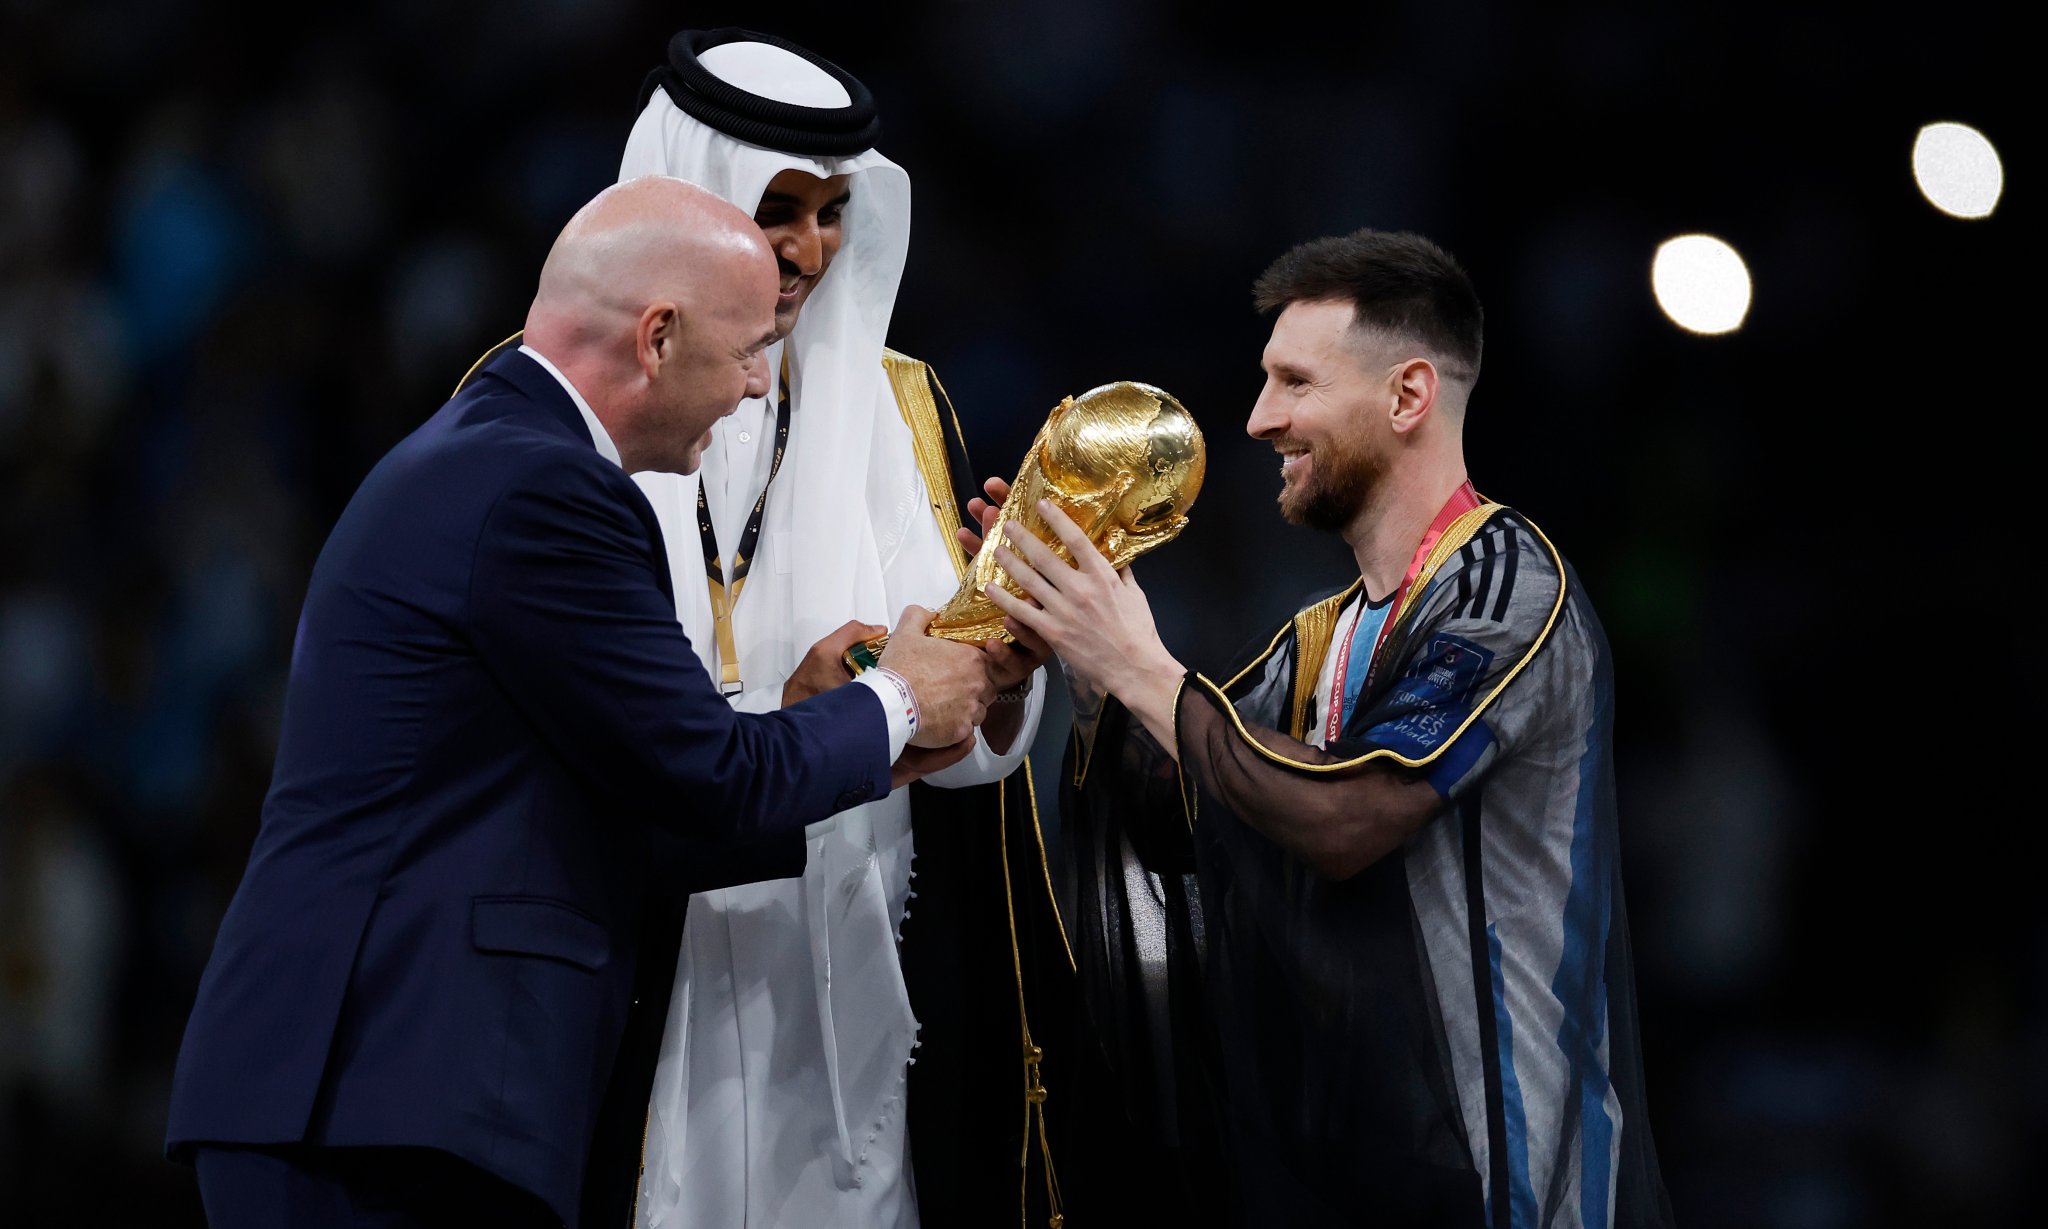 Mixed reaction as Lionel Messi draped in Arab cloak before lifting World Cup